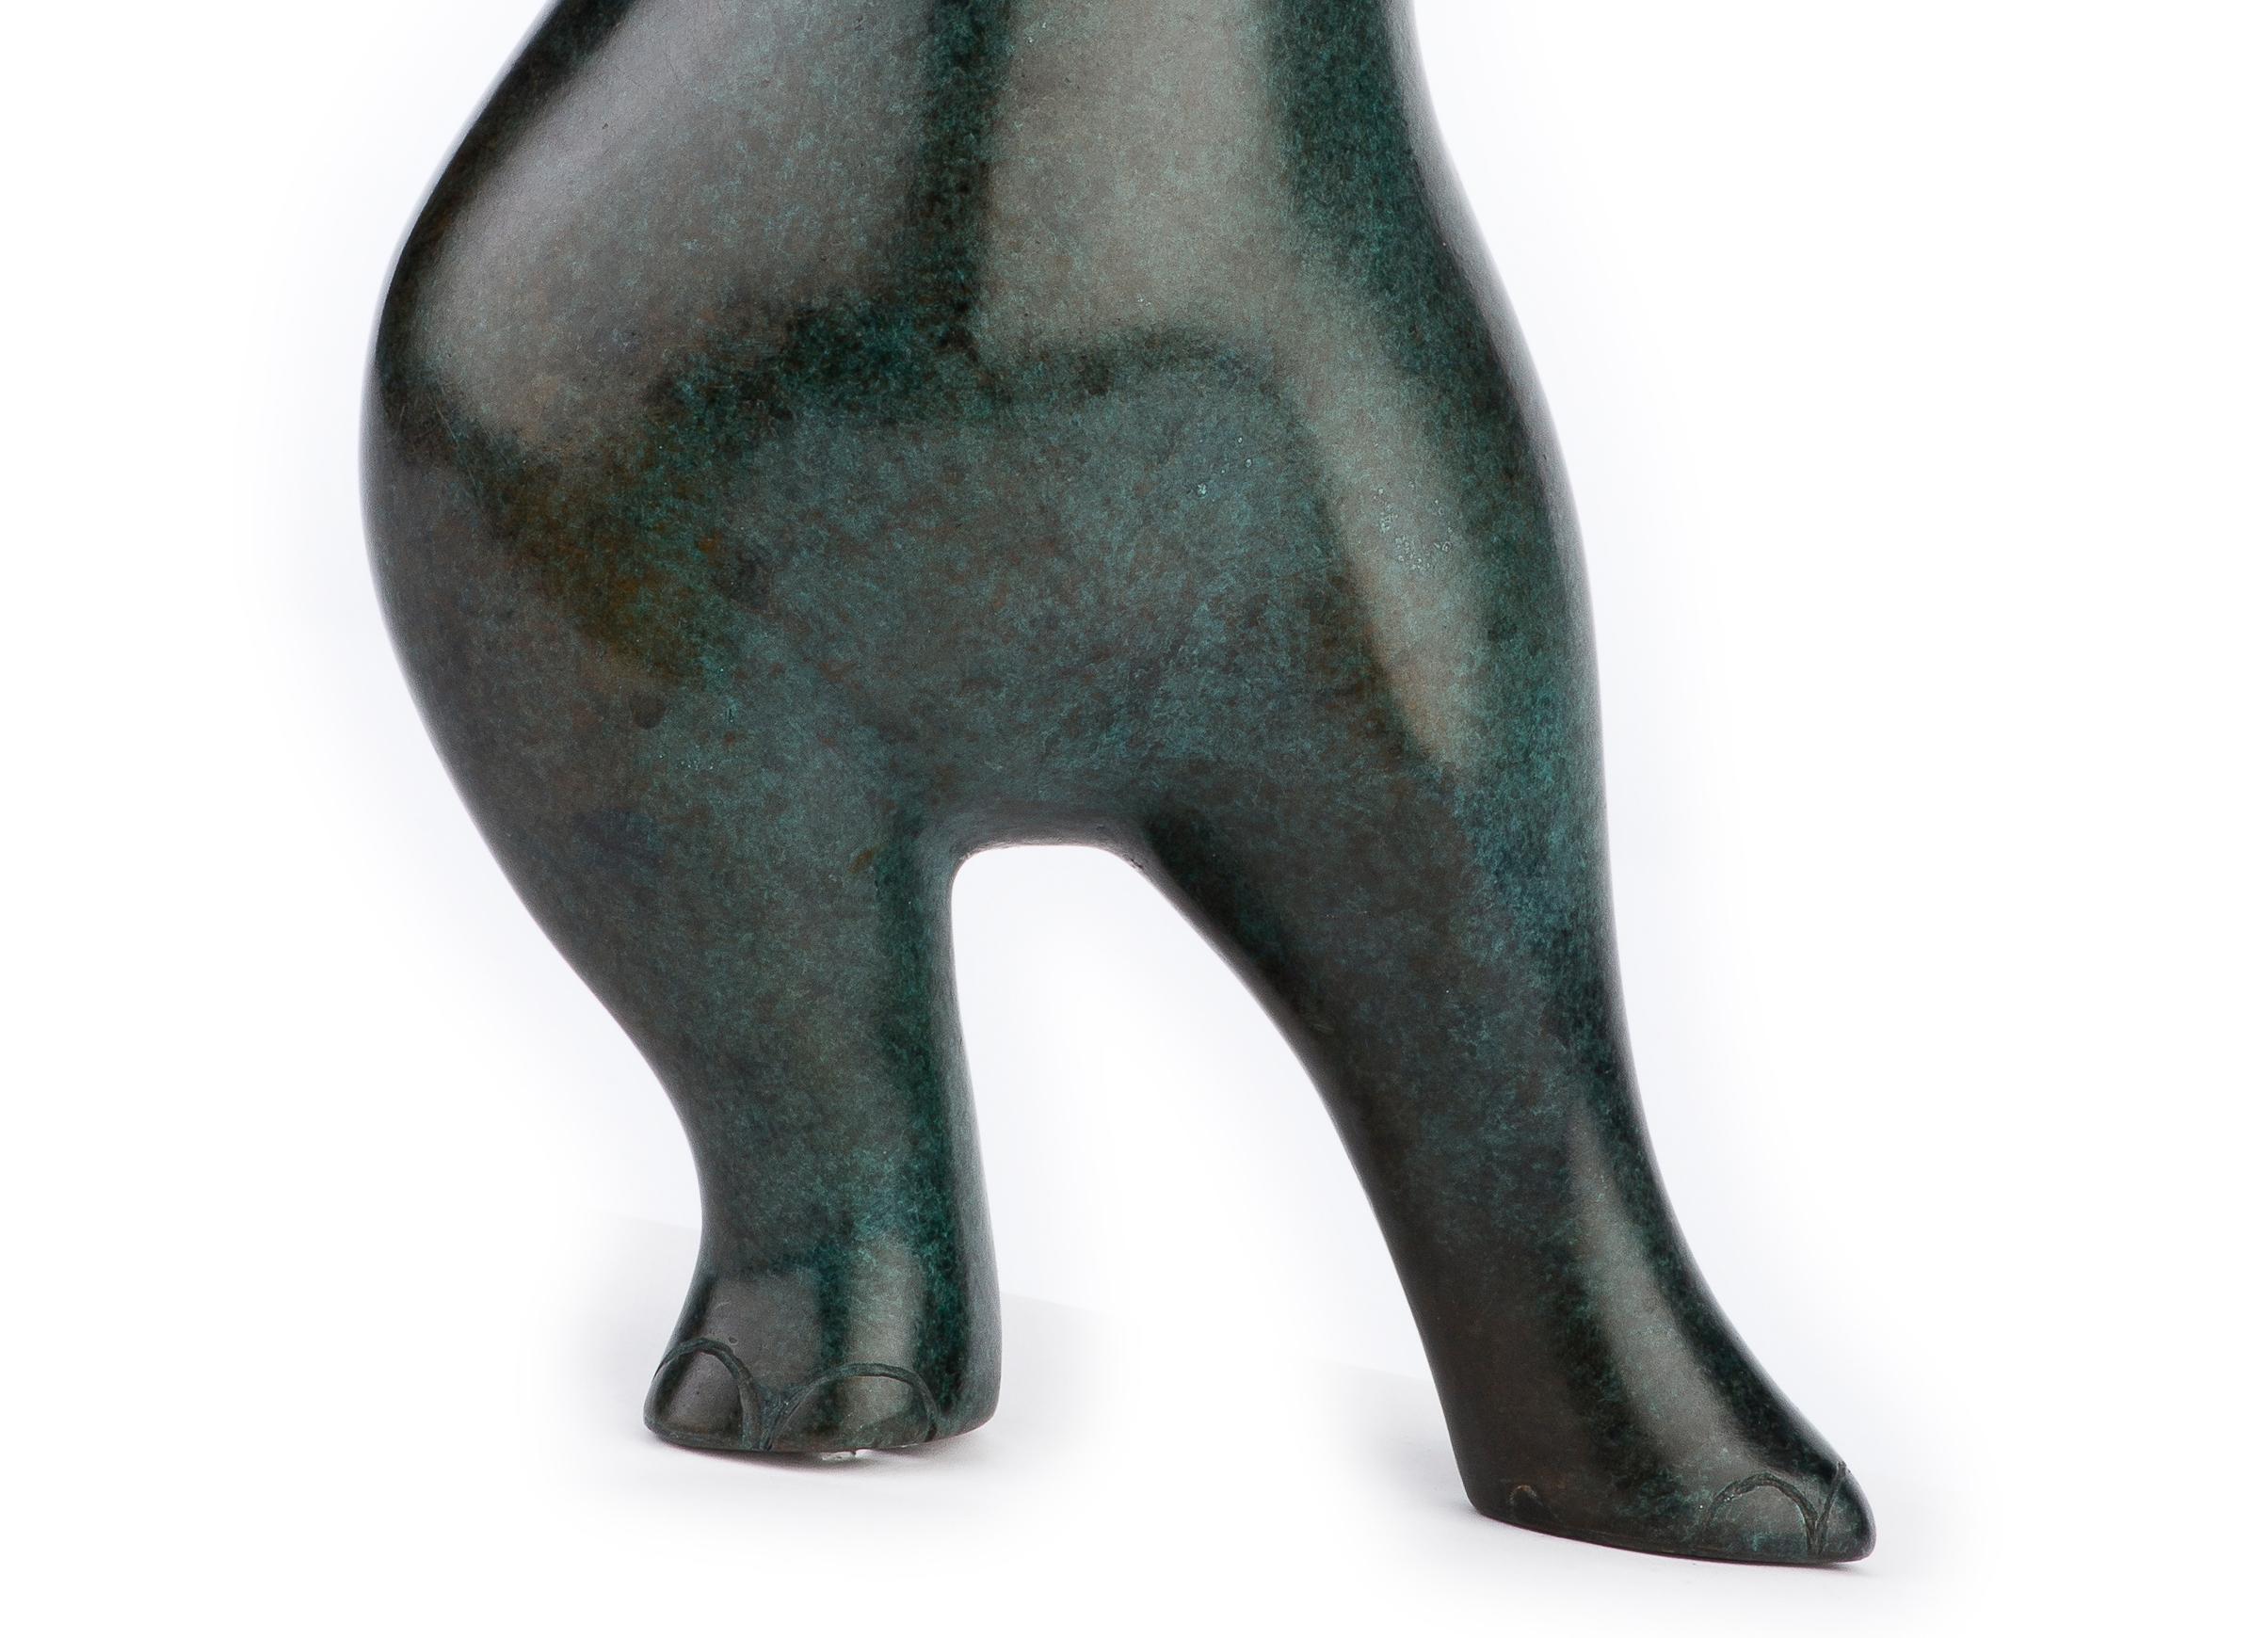 The exuberant and optimistic bronze sculptures of Dutch artist Miep Maarse (1945) are a feast for the eyes. Dancing elephants, bathing hippos and playing bears characterize her oeuvre. The images are optimistic in tone and message. Through her